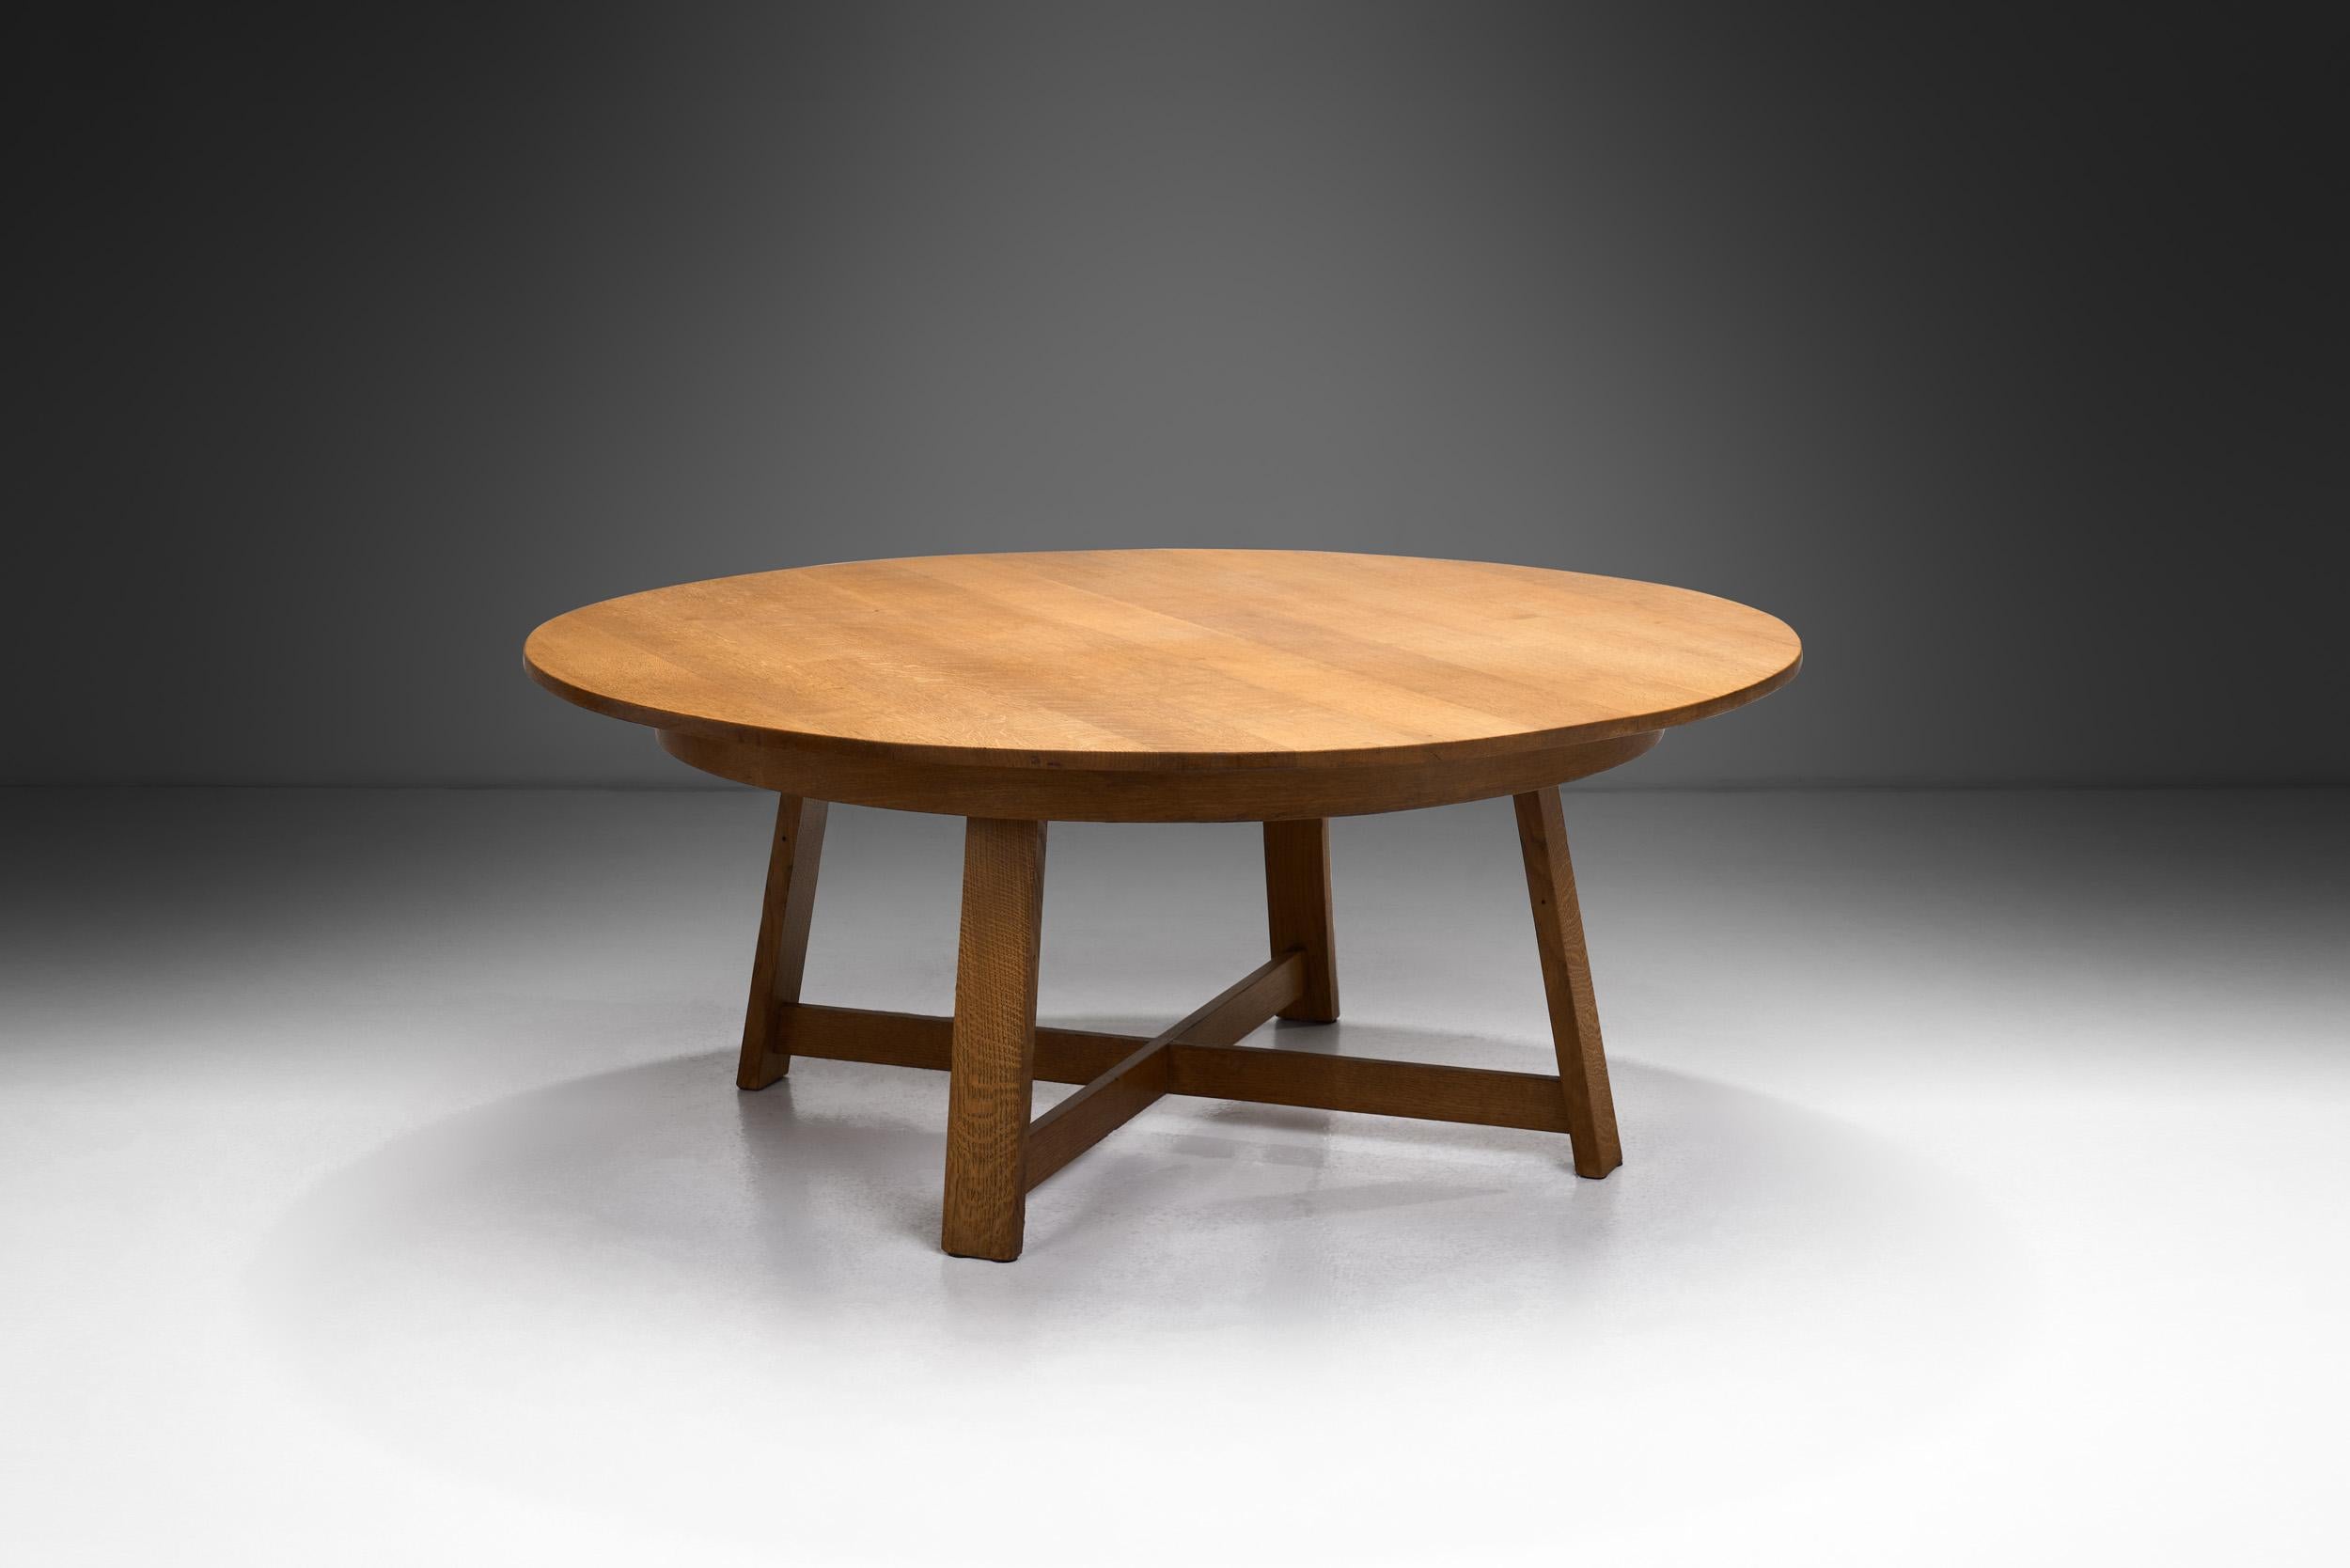 European Circular Solid Wood Table with Cross Stretchers, Europe ca 1960s For Sale